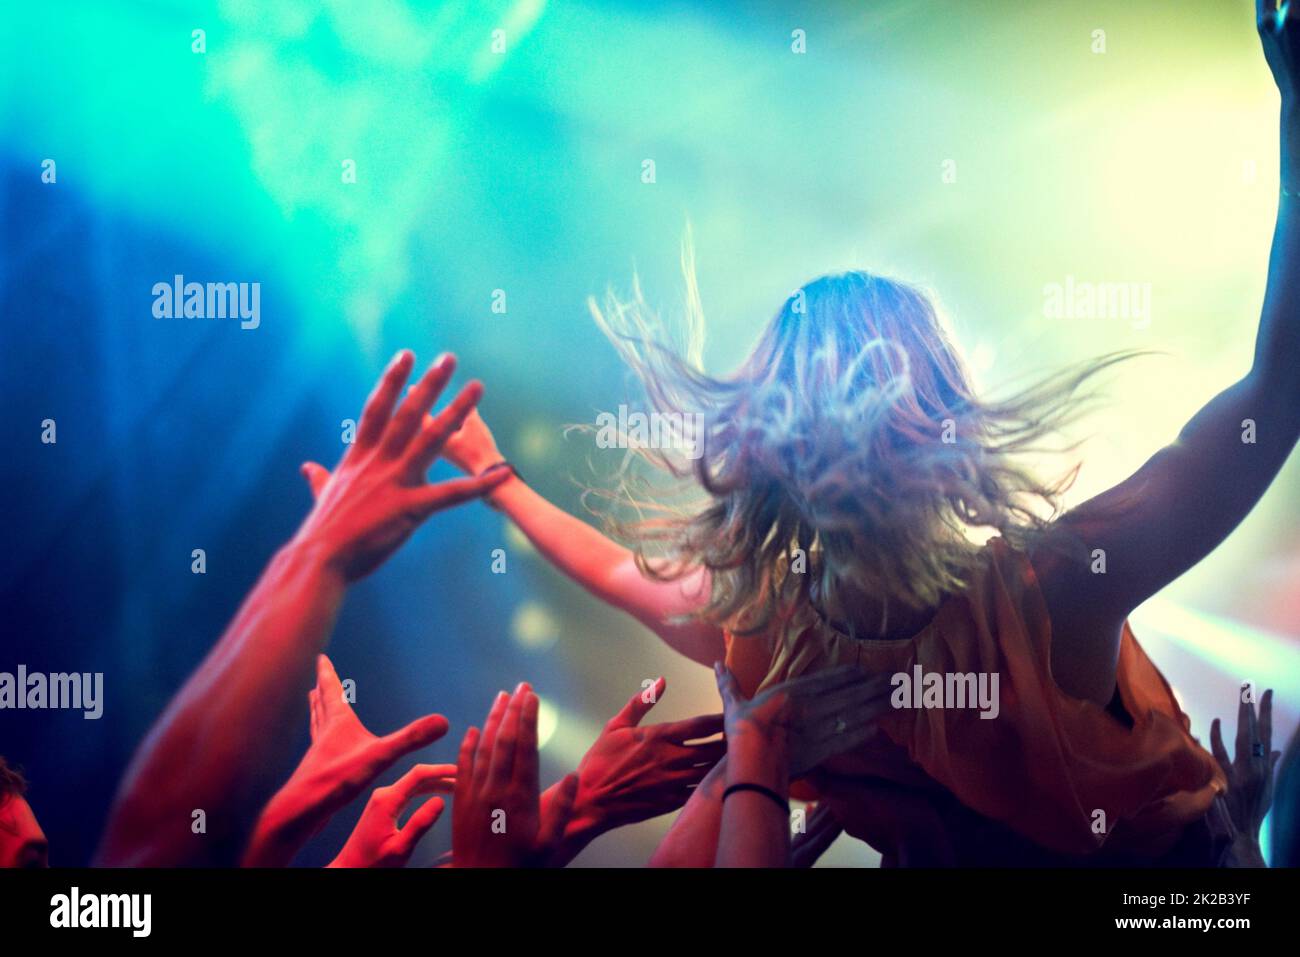 Crowd surfing. A young girl crowd surfing as a band plays one of her favourite songs. Stock Photo